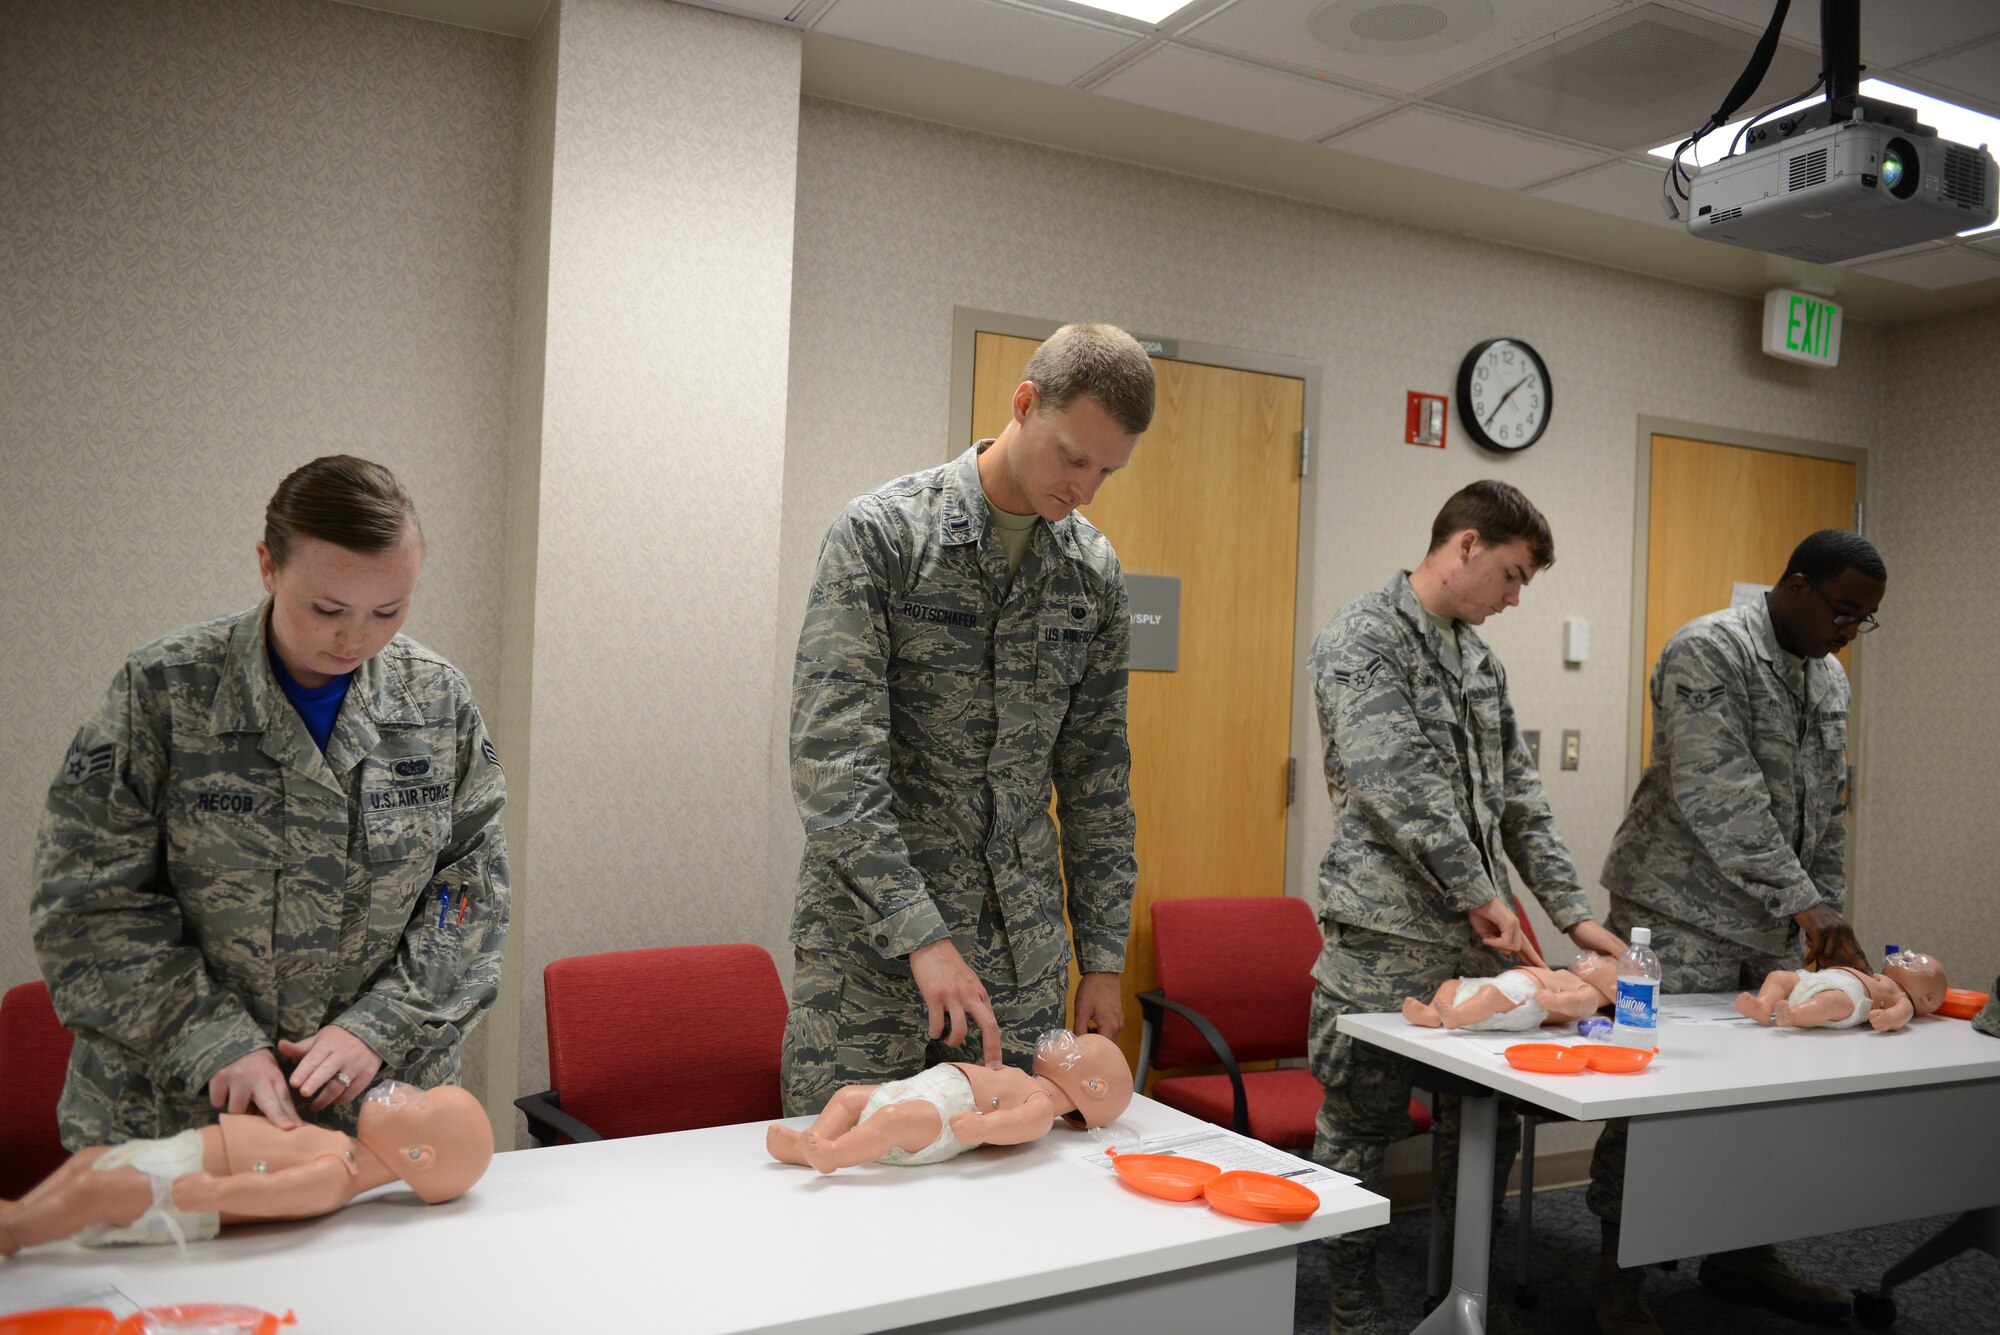 Andersen Airmen attend a Heartsaver CPR course June 12, 2015, at Andersen Air Force Base, Guam. The 36th Medical Group education and training section offers courses to provide the most accurate and up-to-date lifesaving practices for members. (U.S. Air Force photo by Airman 1st Class Arielle Vasquez/Released)